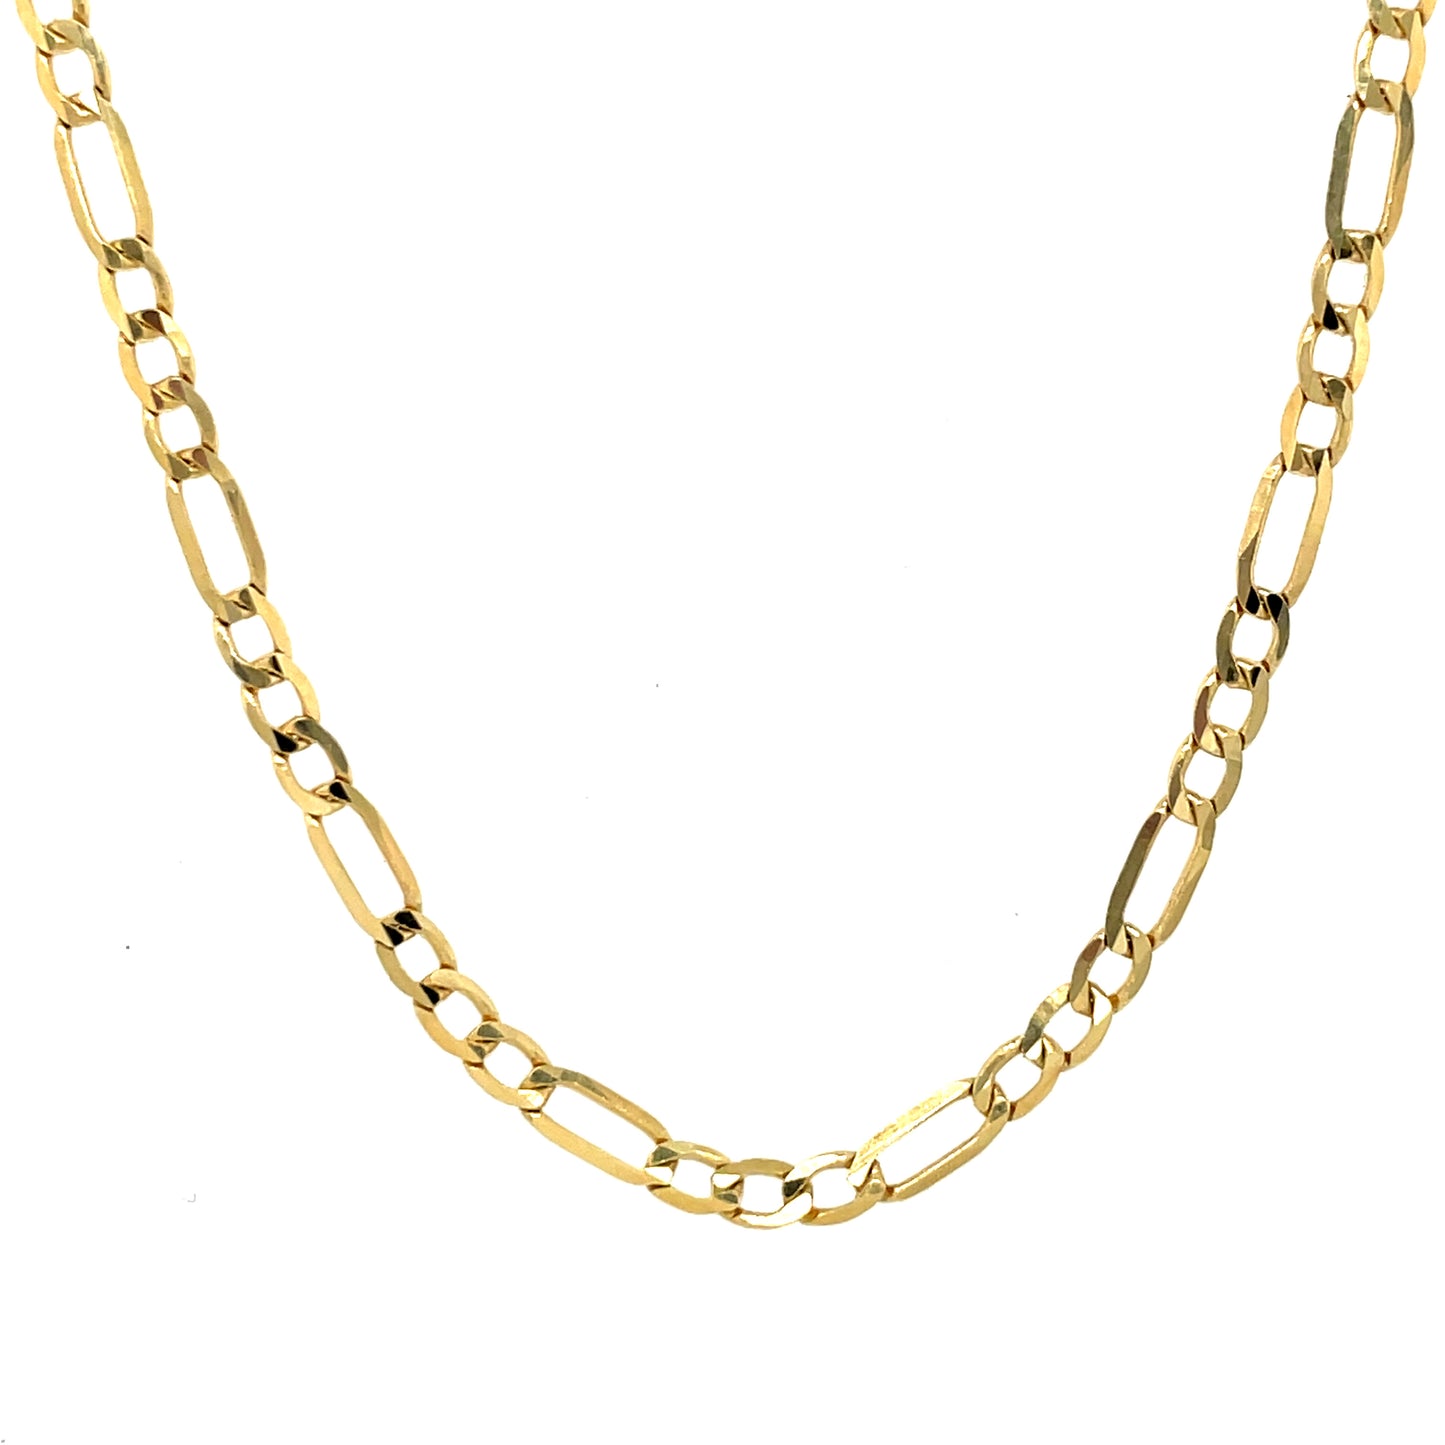 14K Gold Chains/Necklace